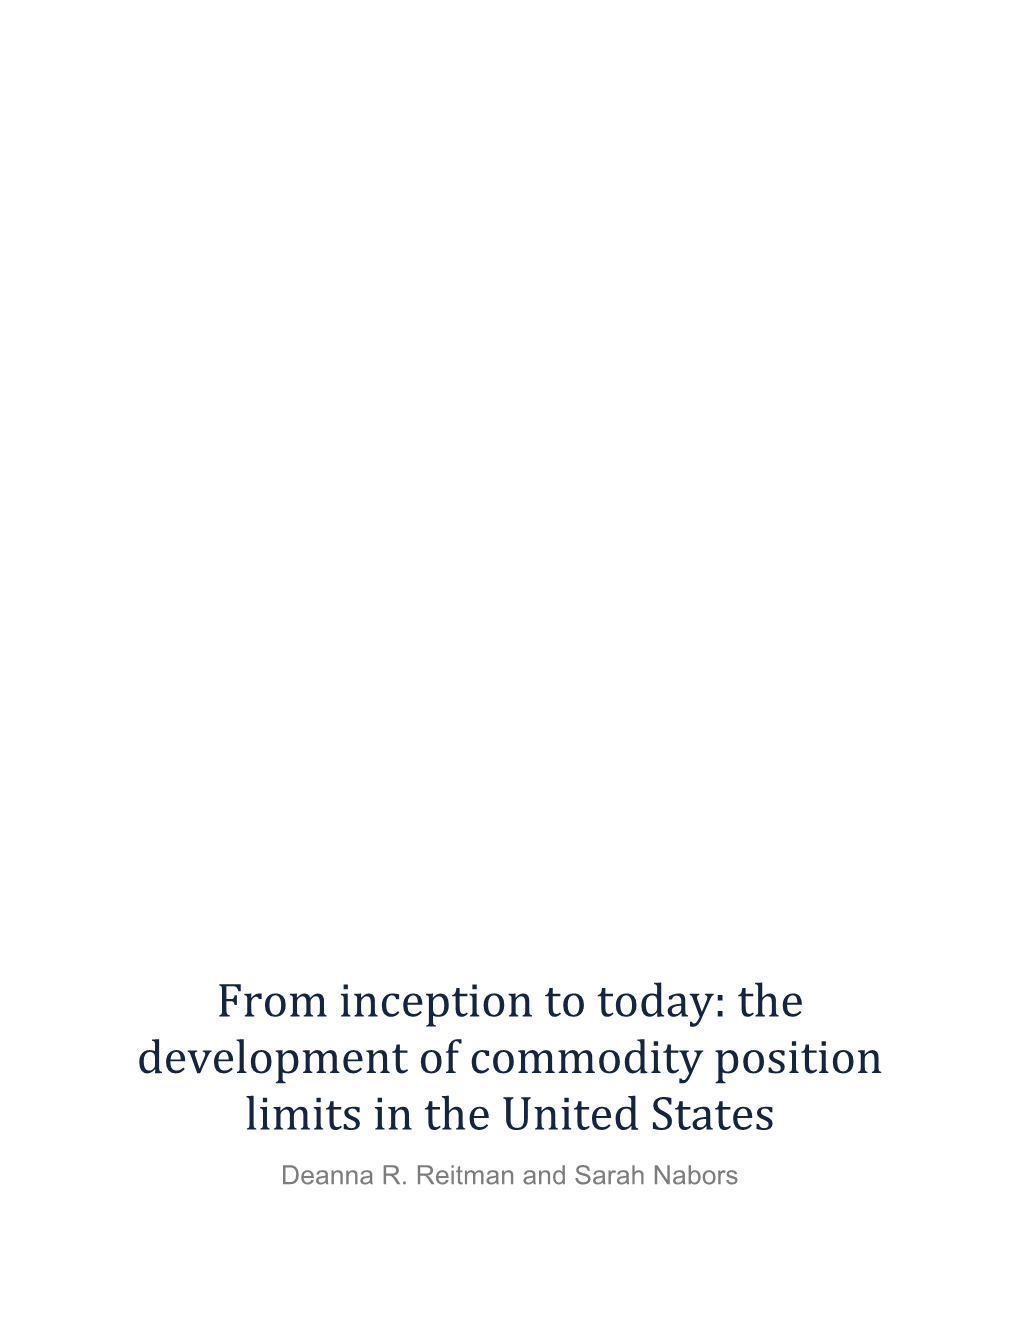 The Development of Commodity Position Limits in the United States Deanna R